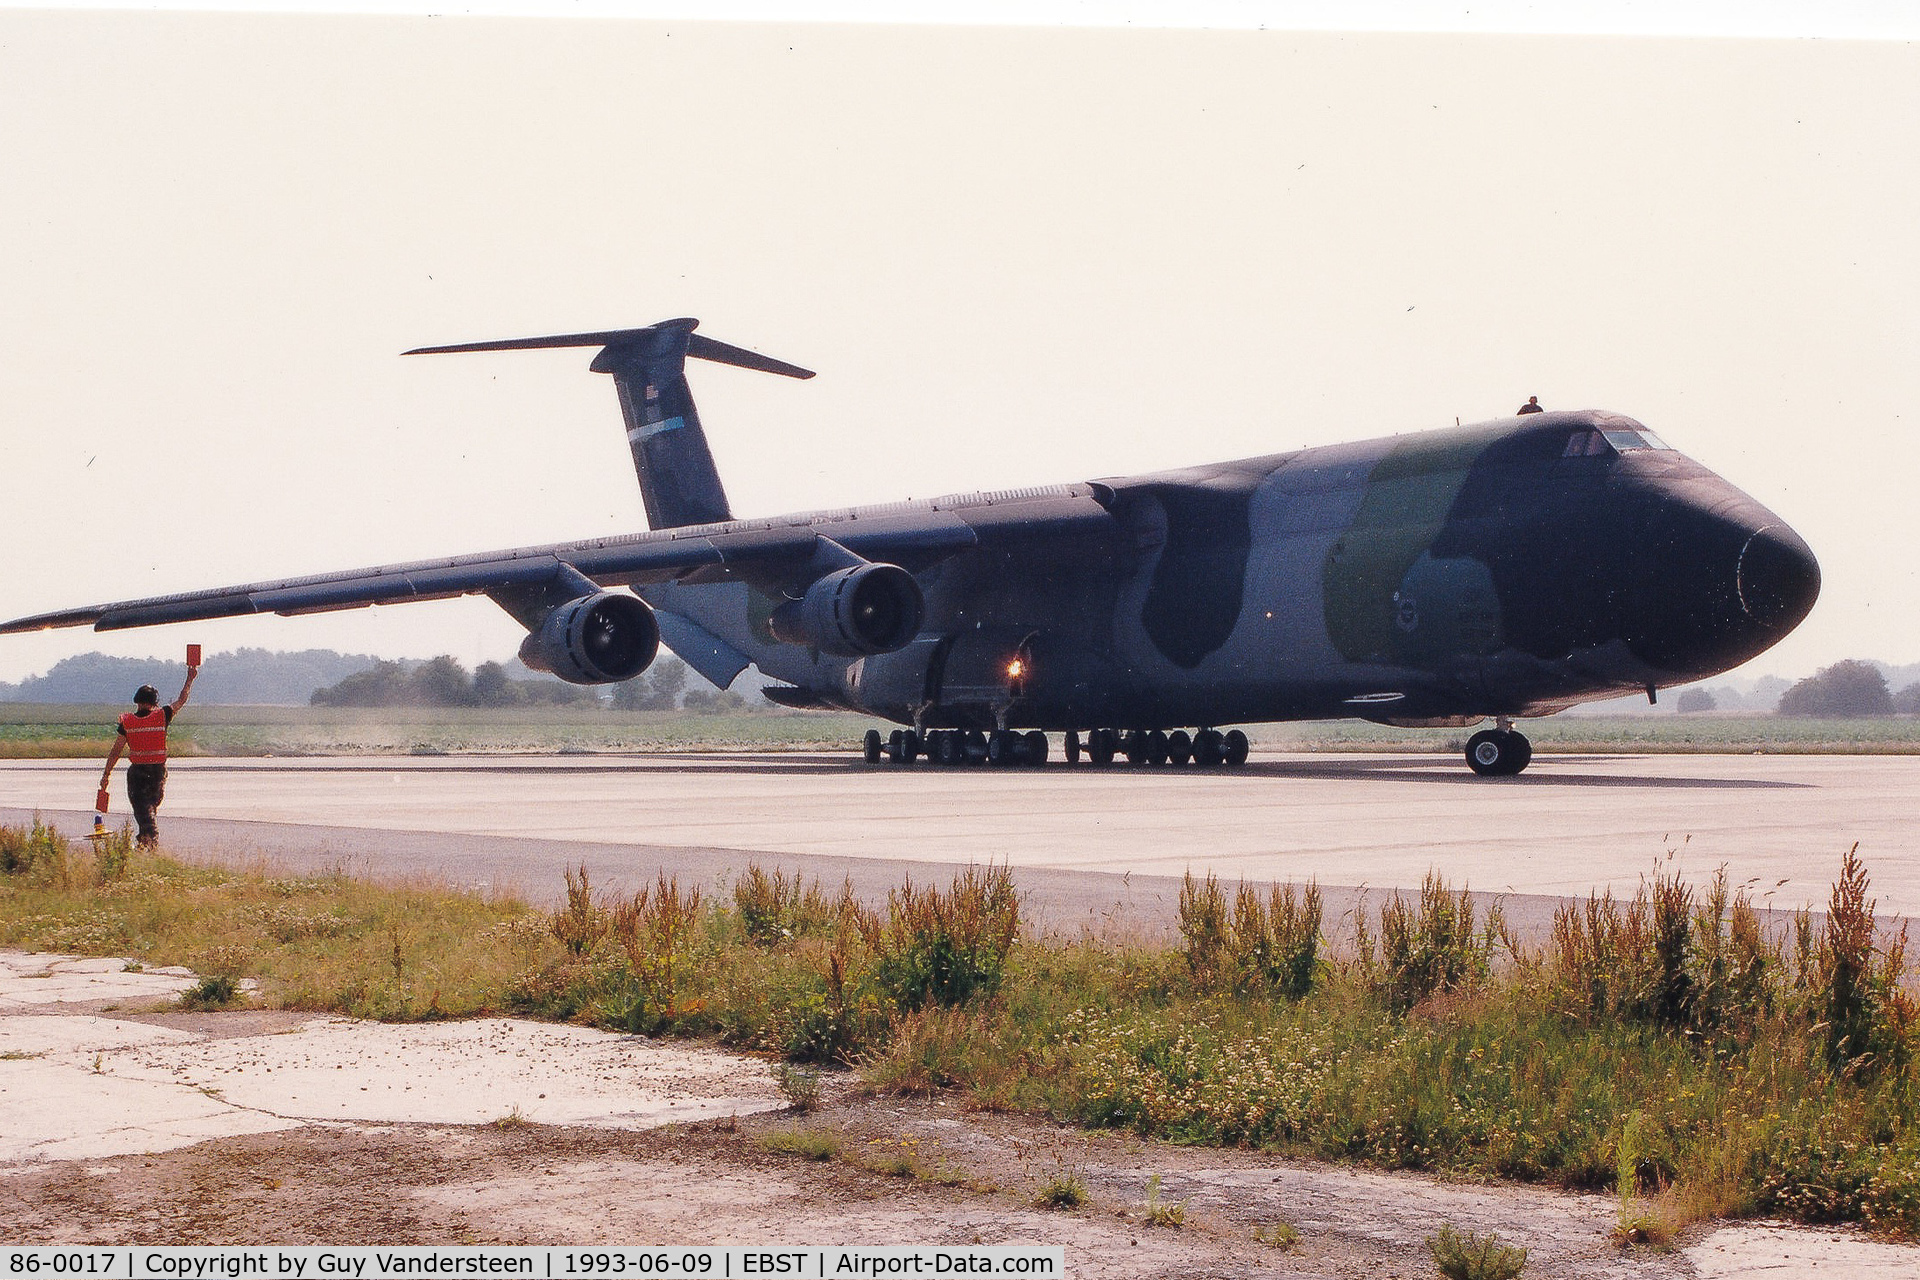 86-0017, 1986 Lockheed C-5B Galaxy C/N 500-0103, C-5B visiting EBST during Exercise Coronet Dart in support of South Dakota ANG